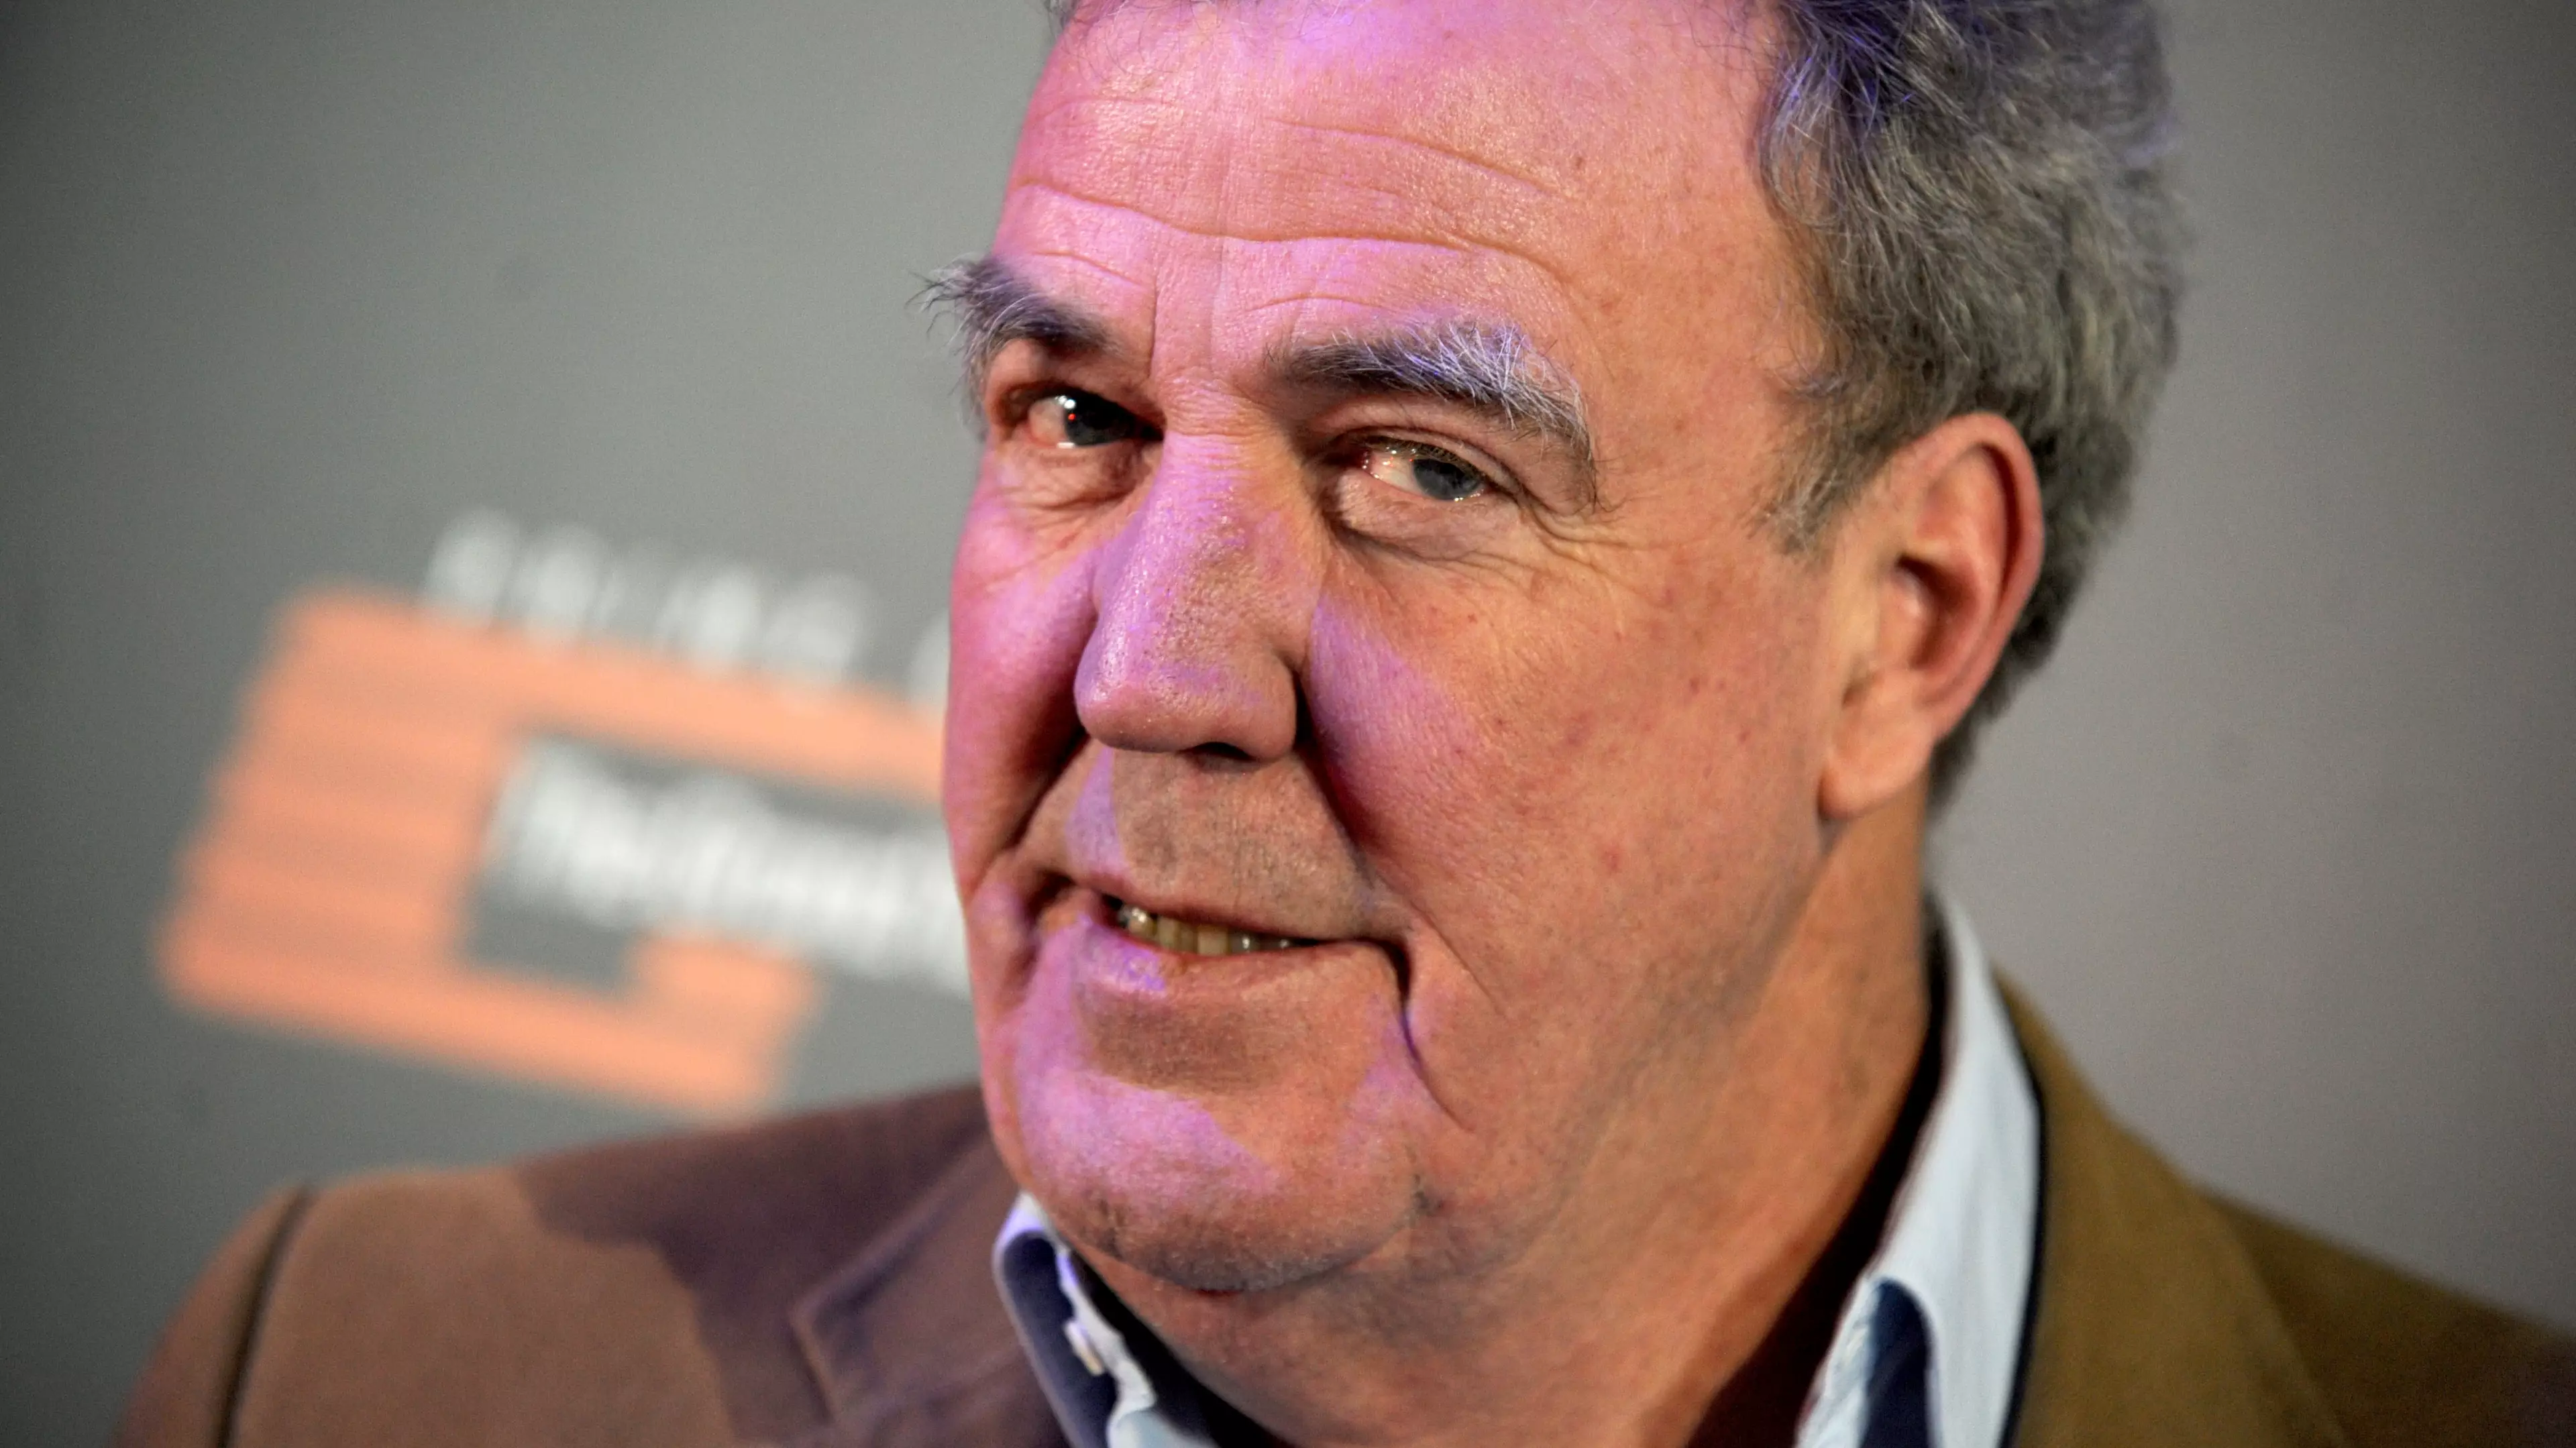 People Are Calling For Jeremy Clarkson To Replace Piers Morgan On Good Morning Britain